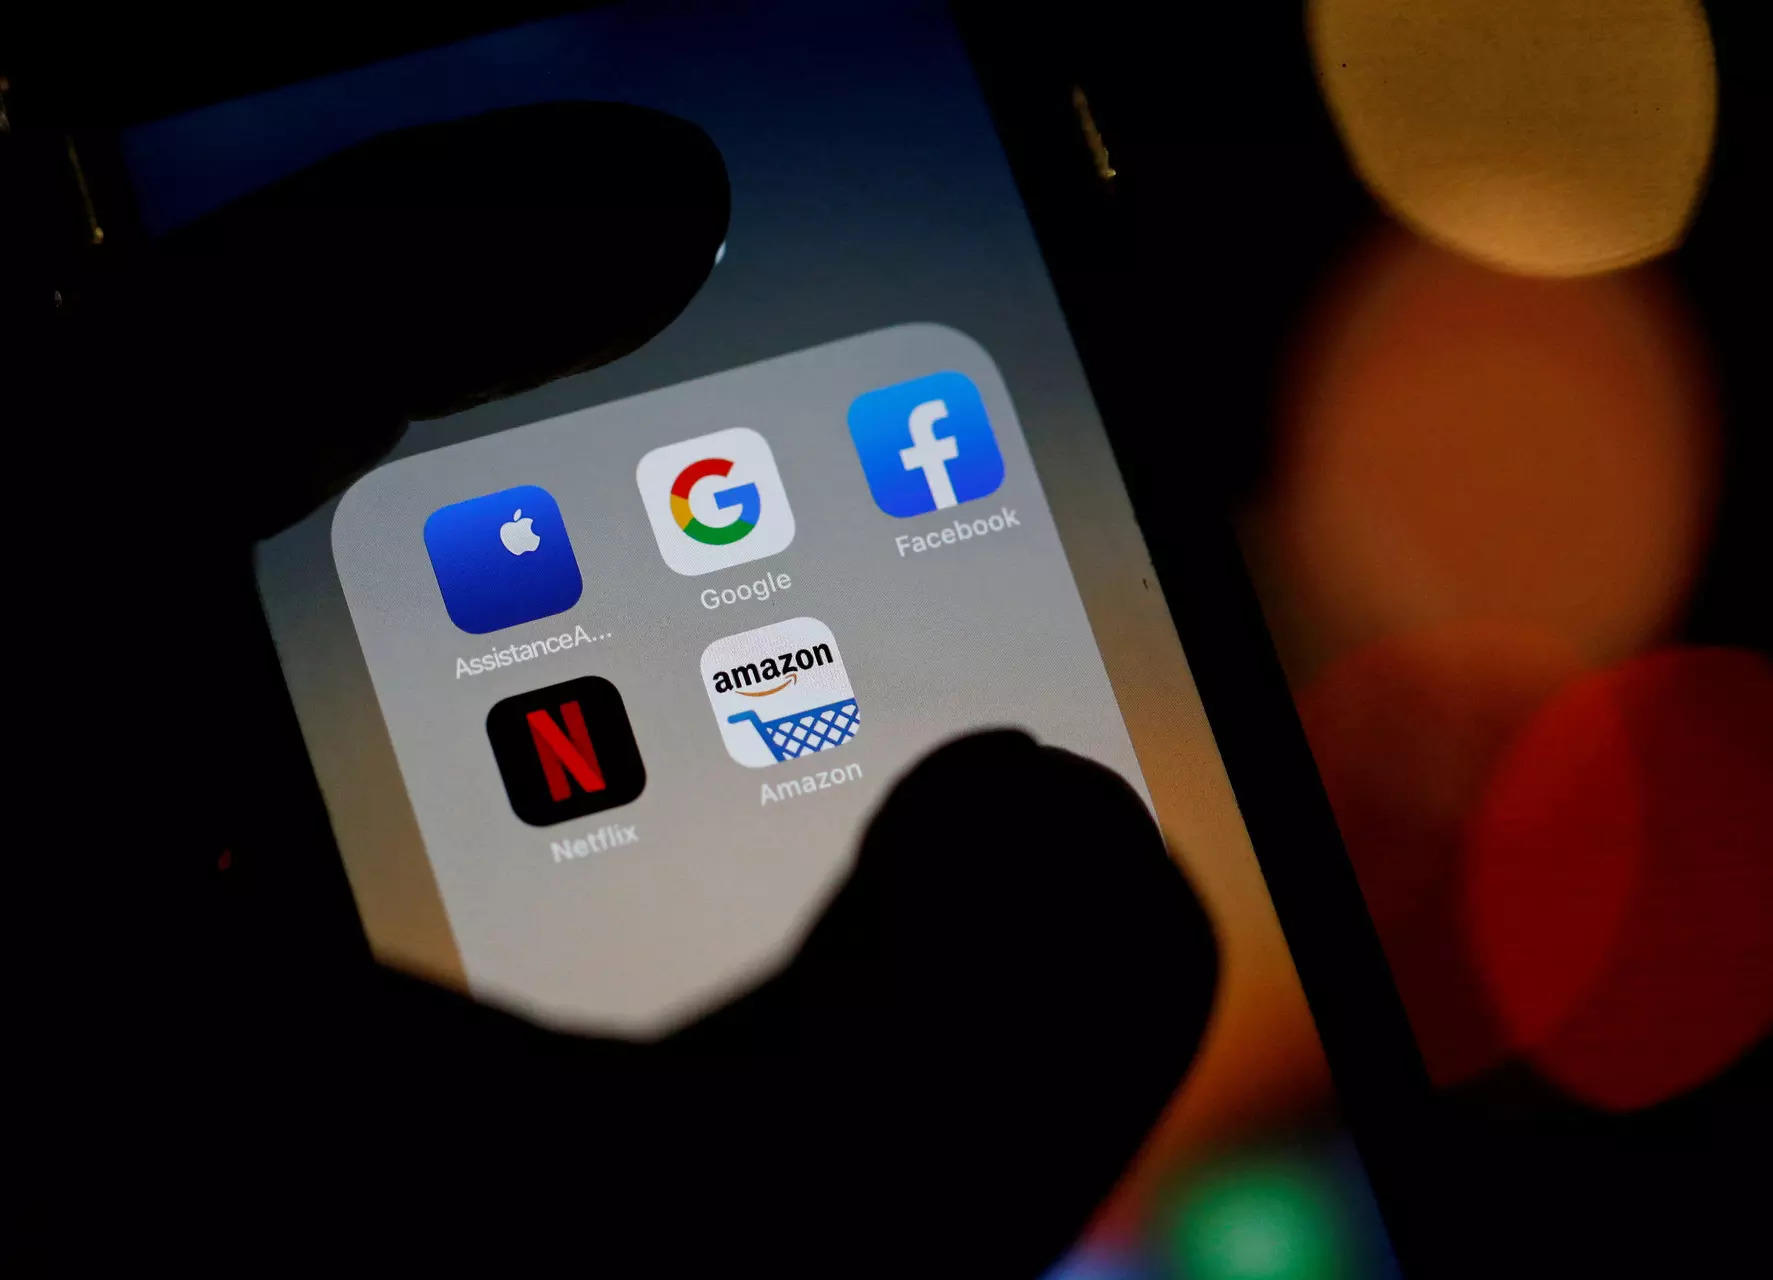 FILE PHOTO: The logos of mobile apps, Google, Amazon, Facebook, Apple and Netflix, are displayed on a screen in this illustration picture